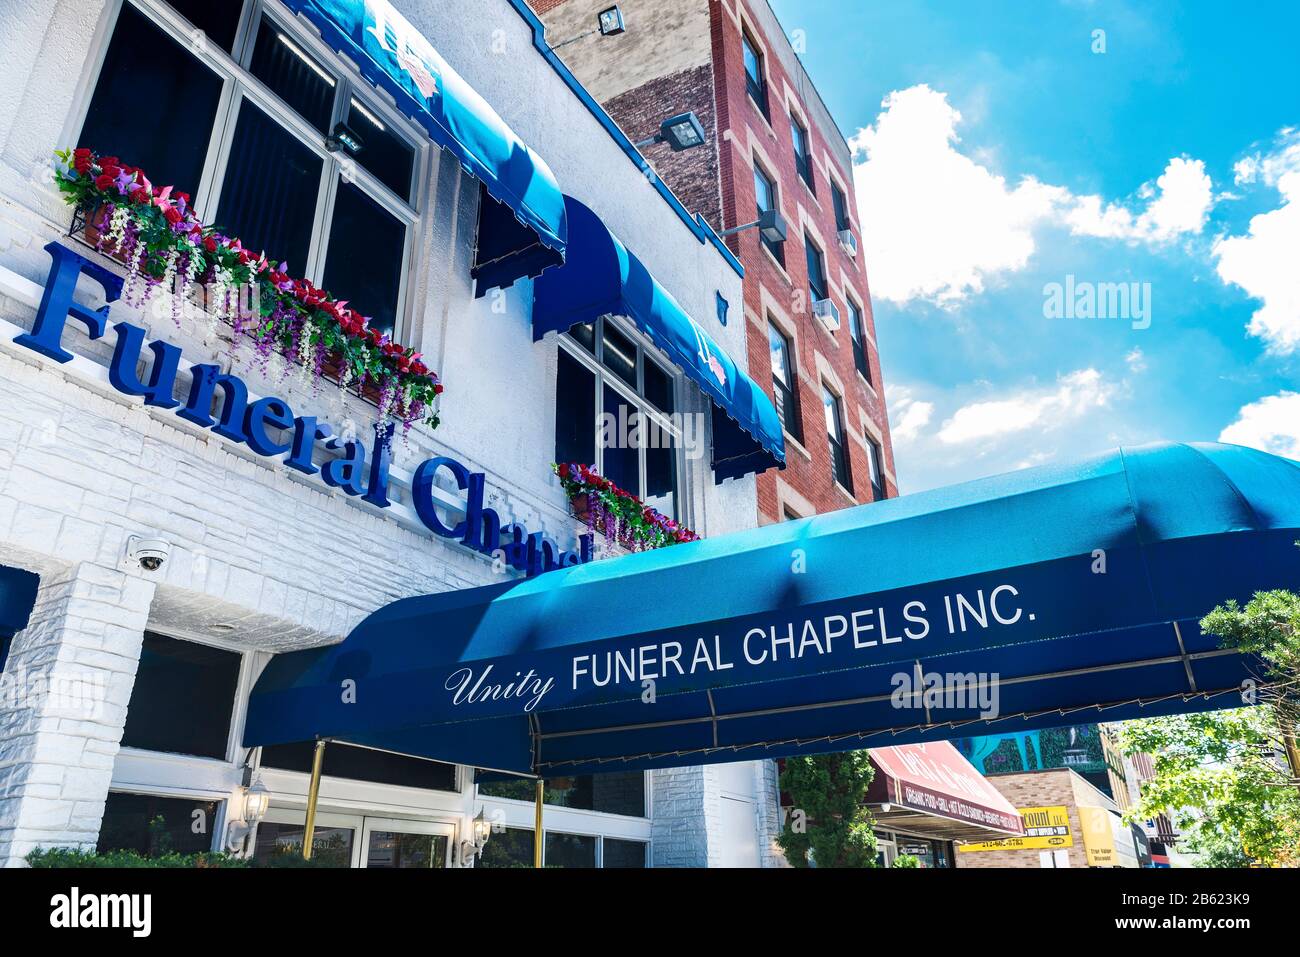 New York City, USA - August 4, 2018: Facade of the Unity Funeral Chapels in Harlem, Manhattan, New York City, USA Stock Photo